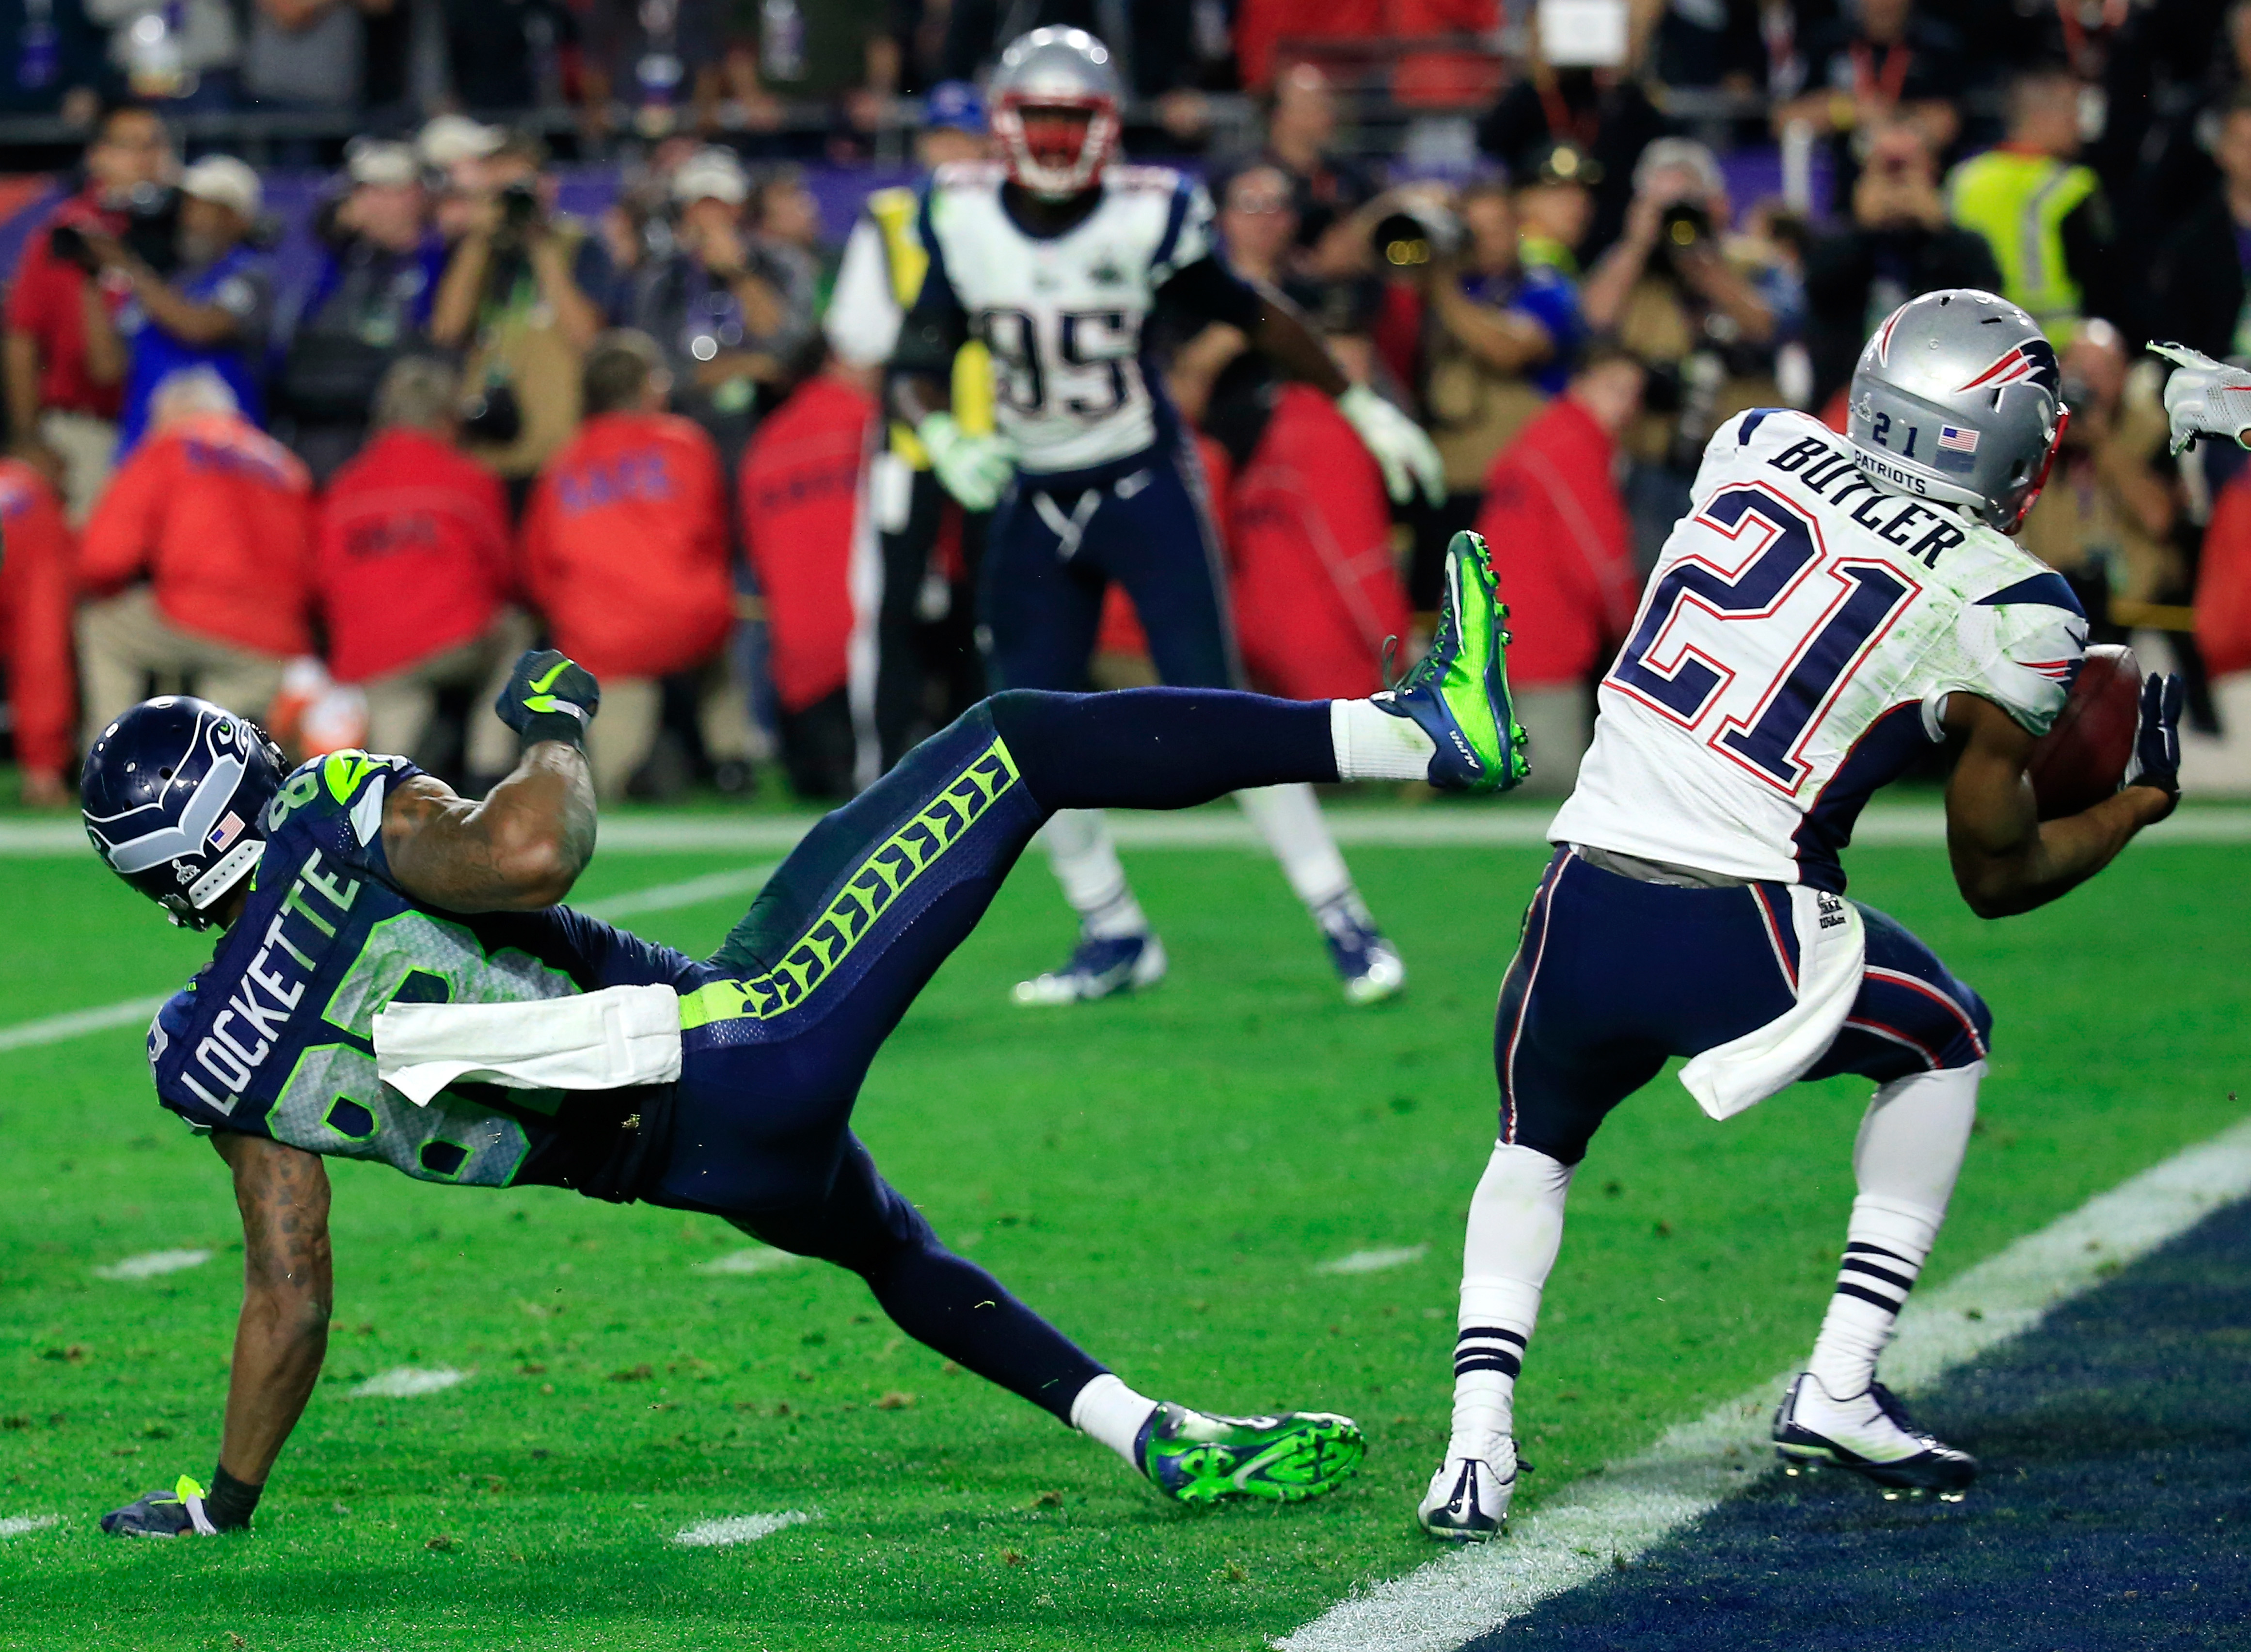 Malcolm Butler #21 of the New England Patriots intercepts a pass by Russell Wilson #3 of the Seattle Seahawks intended for  Ricardo Lockette #83 late in the fourth quarter during Super Bowl XLIX at University of Phoenix Stadium on February 1, 2015 in Glendale, Arizona. (Rob Carr—Getty Images)